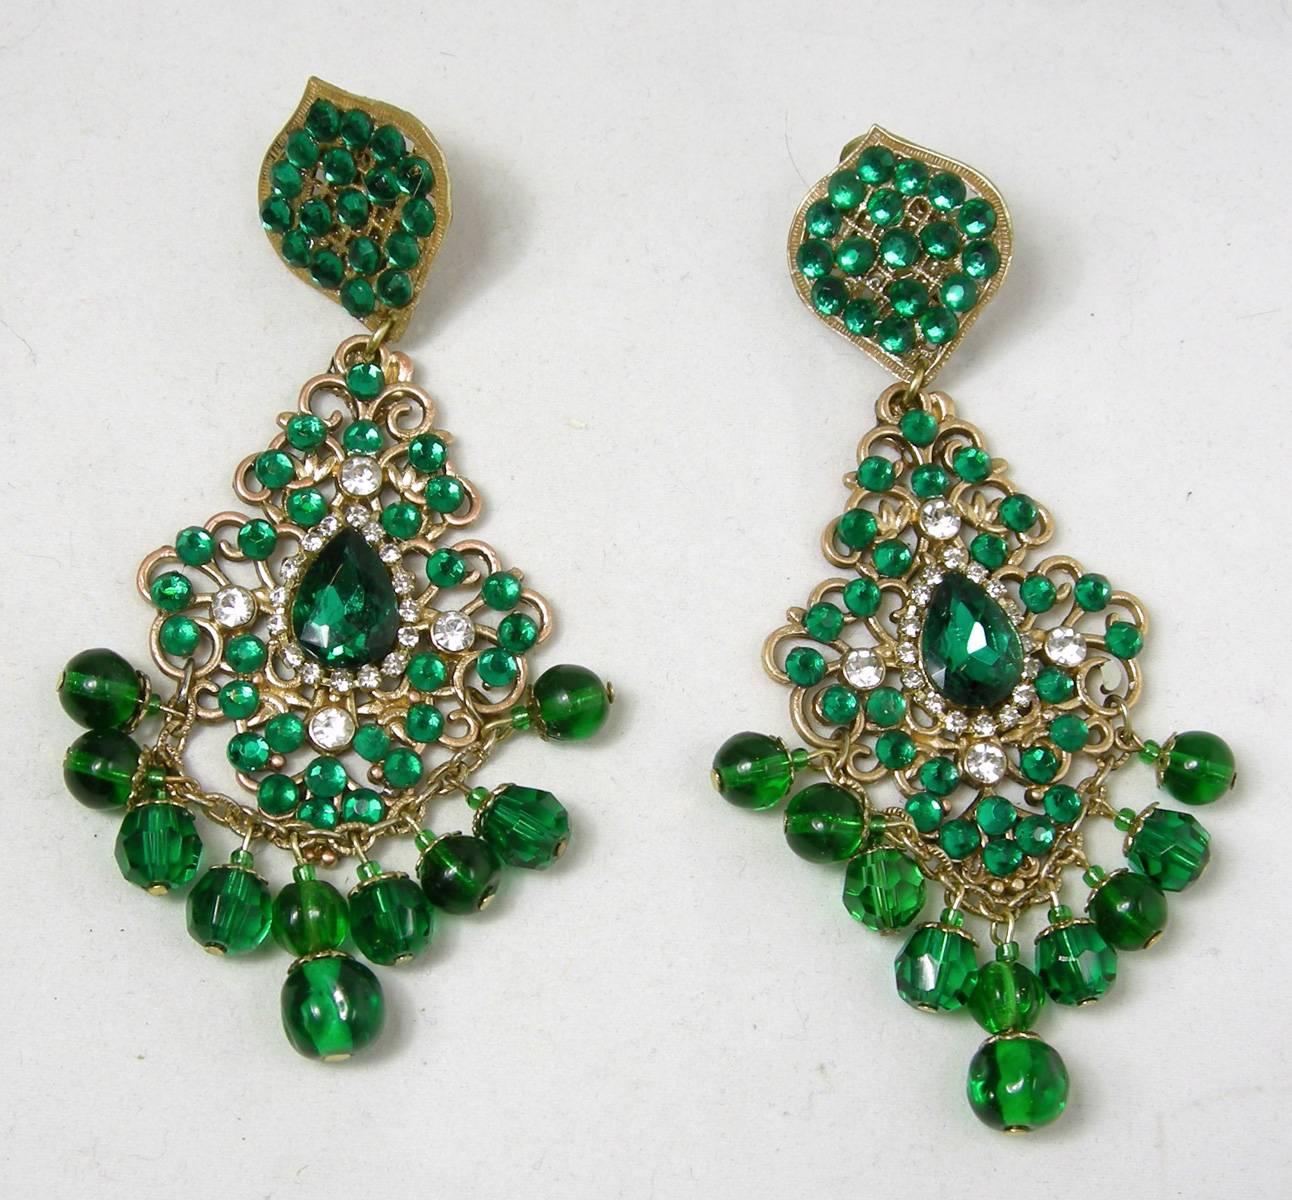 These beautiful vintage DeMario dangling clip earrings has a cluster of green rhinestones at the top in an intricate gold tone setting.  Hanging down is an elaborate design with green rhinestones set in a curly open work setting.  Clear rhinestones